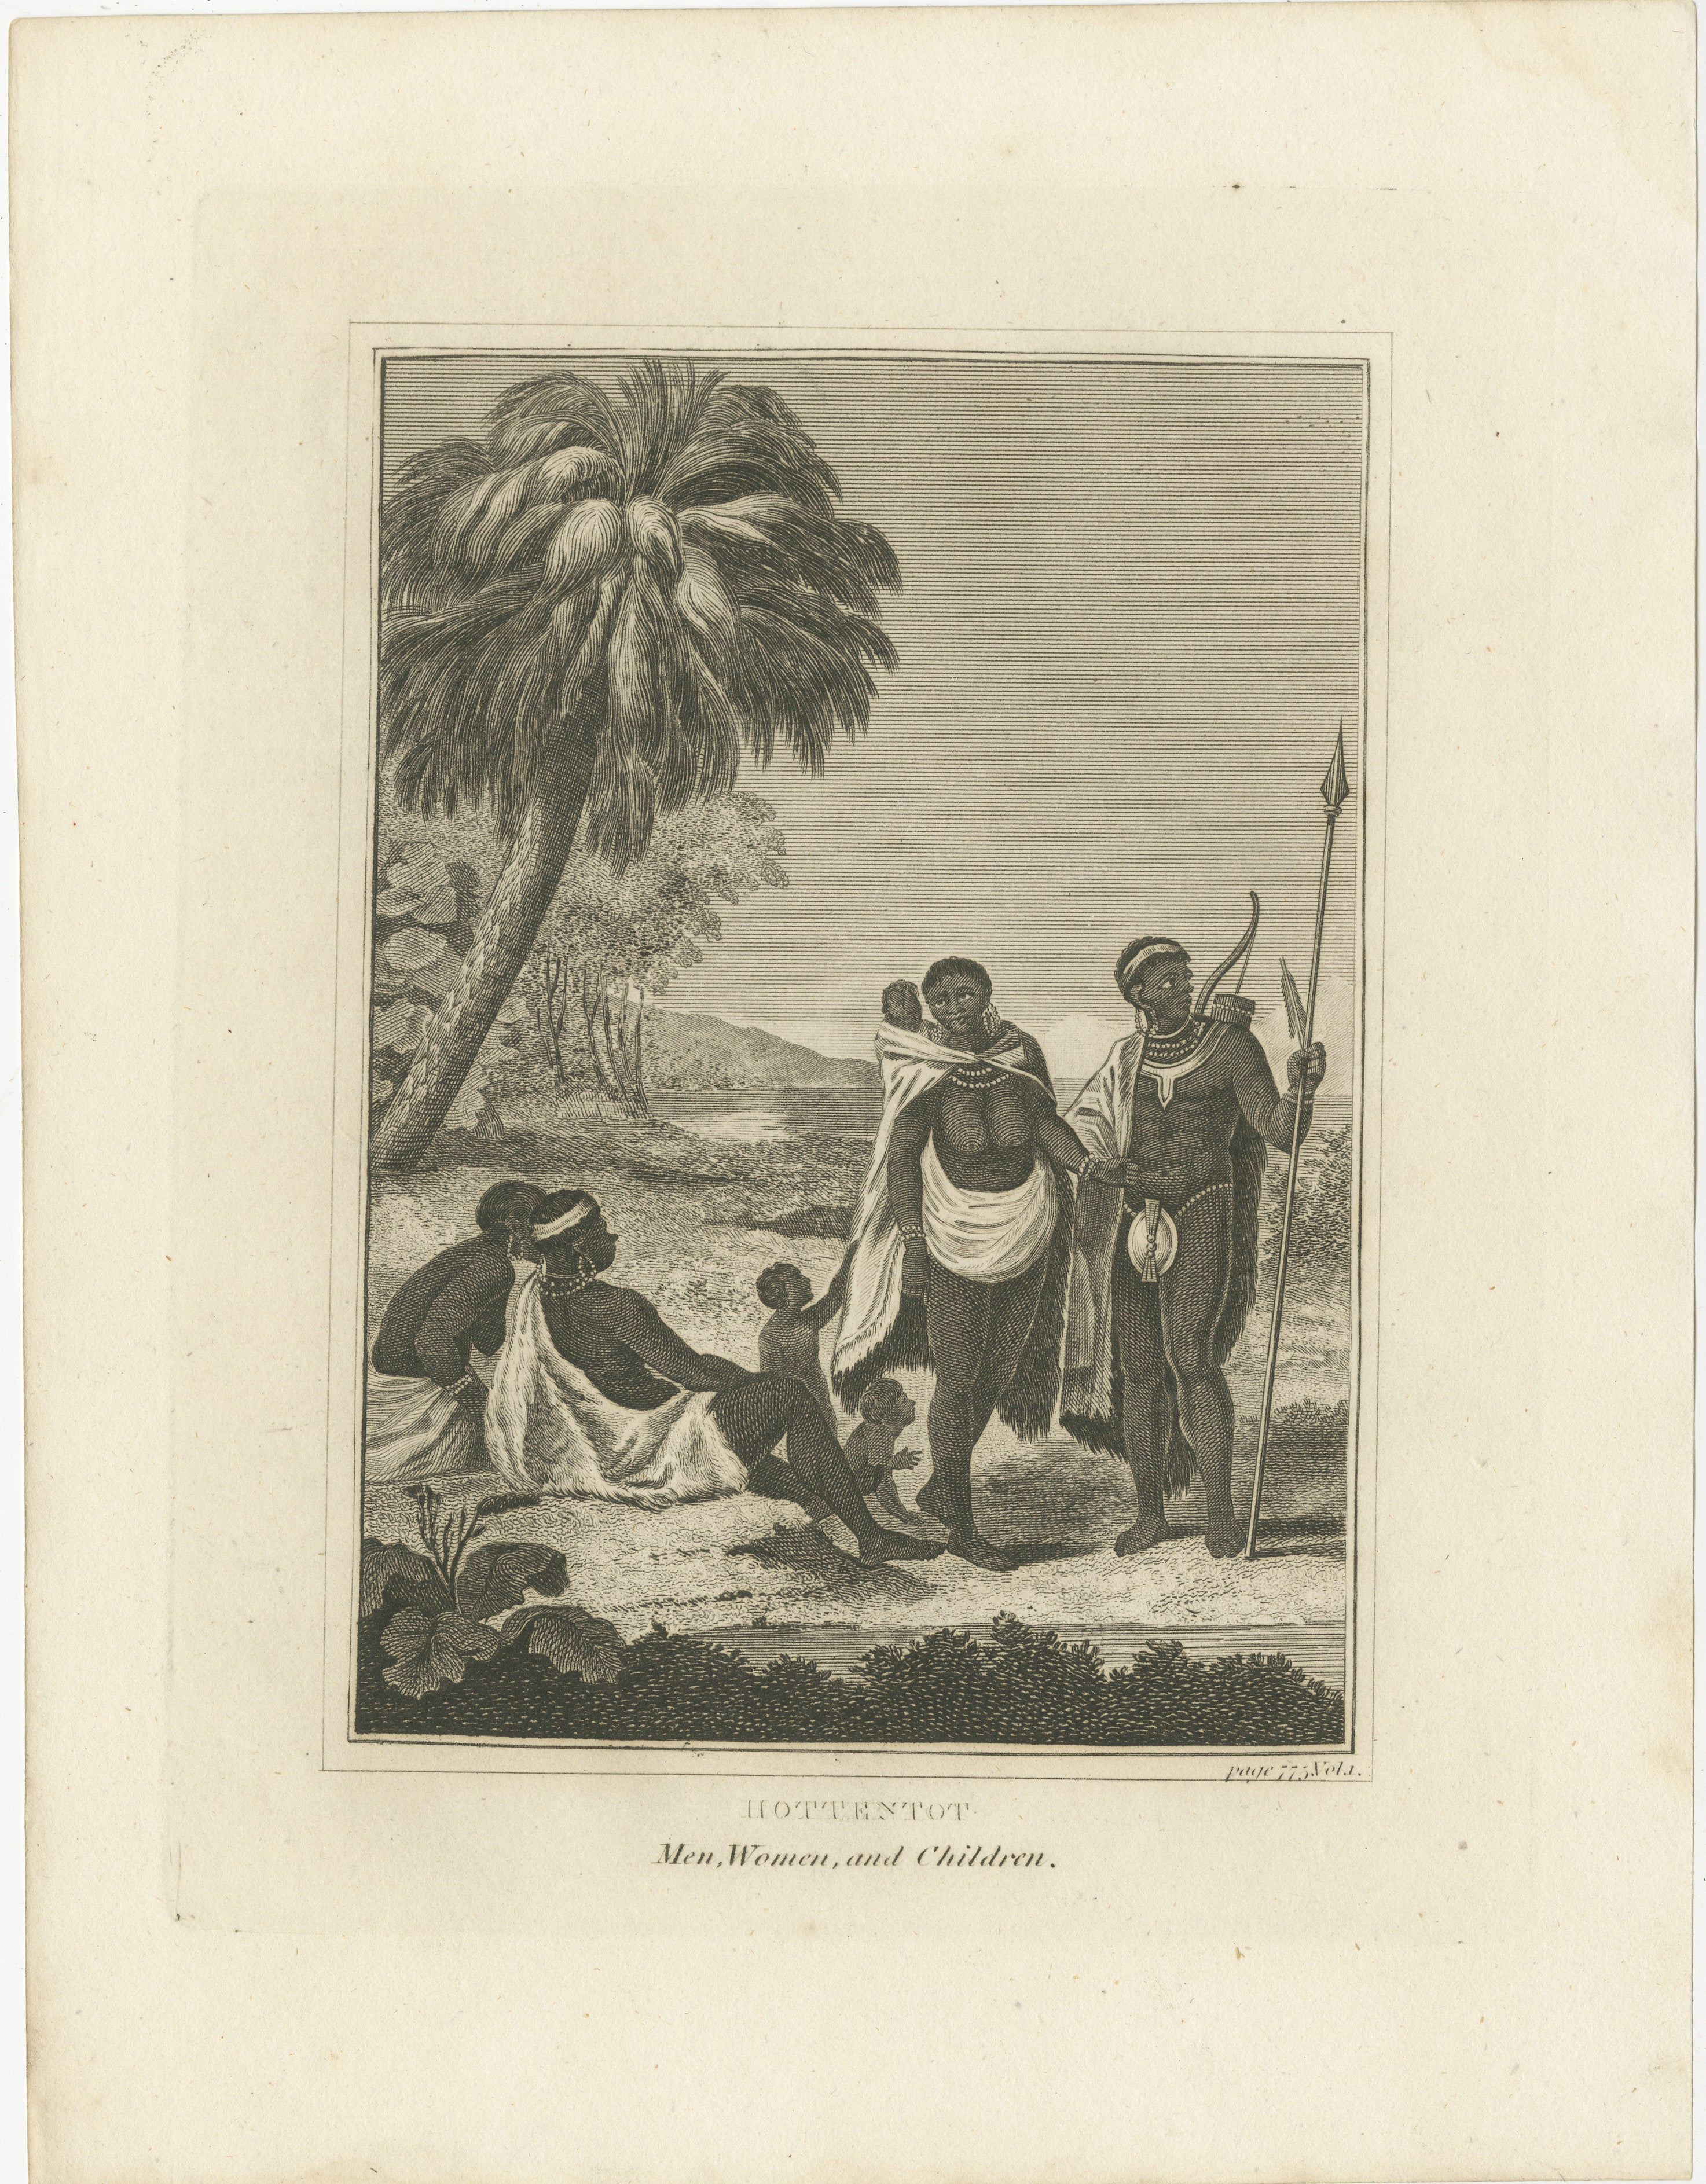 The print is an early 19th-century engraving depicting the Khoikhoi people, historically referred to as the Hottentots, which is an outdated term. The Khoikhoi are indigenous inhabitants of the southwestern regions of Africa. 

The image is labeled